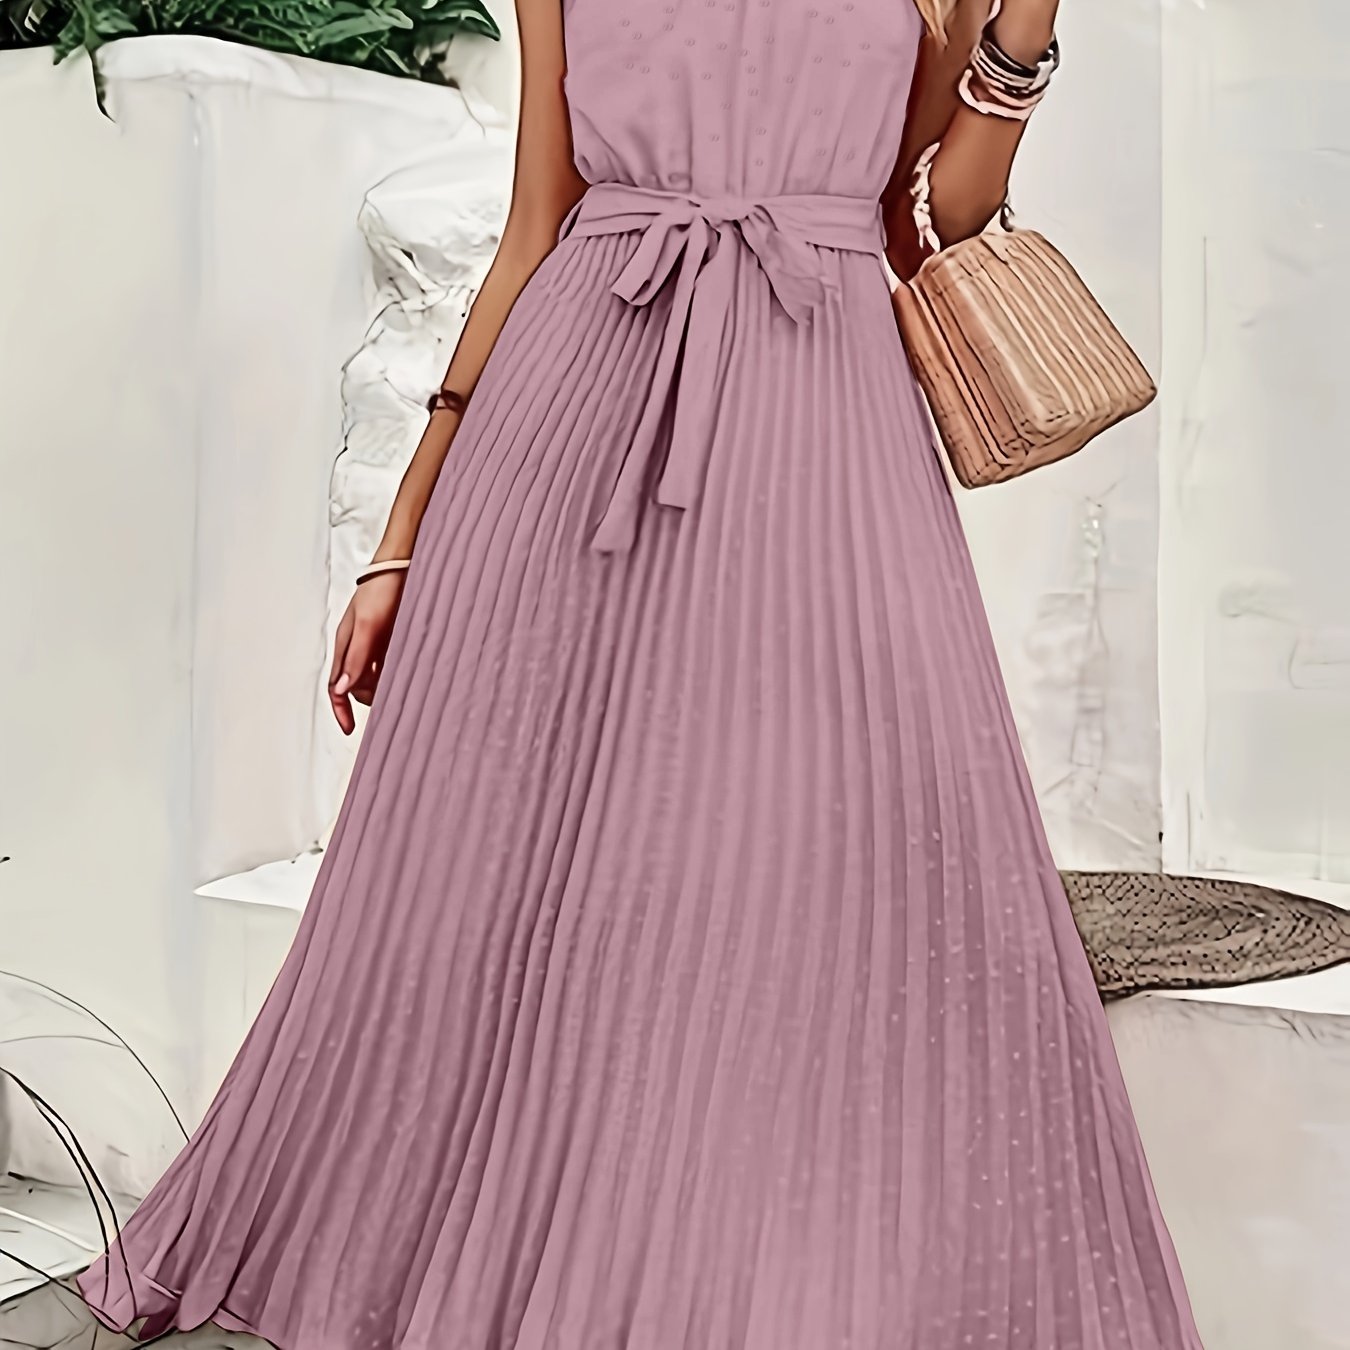 solid pleated dress elegant sleeveless knotted maxi dress womens clothing